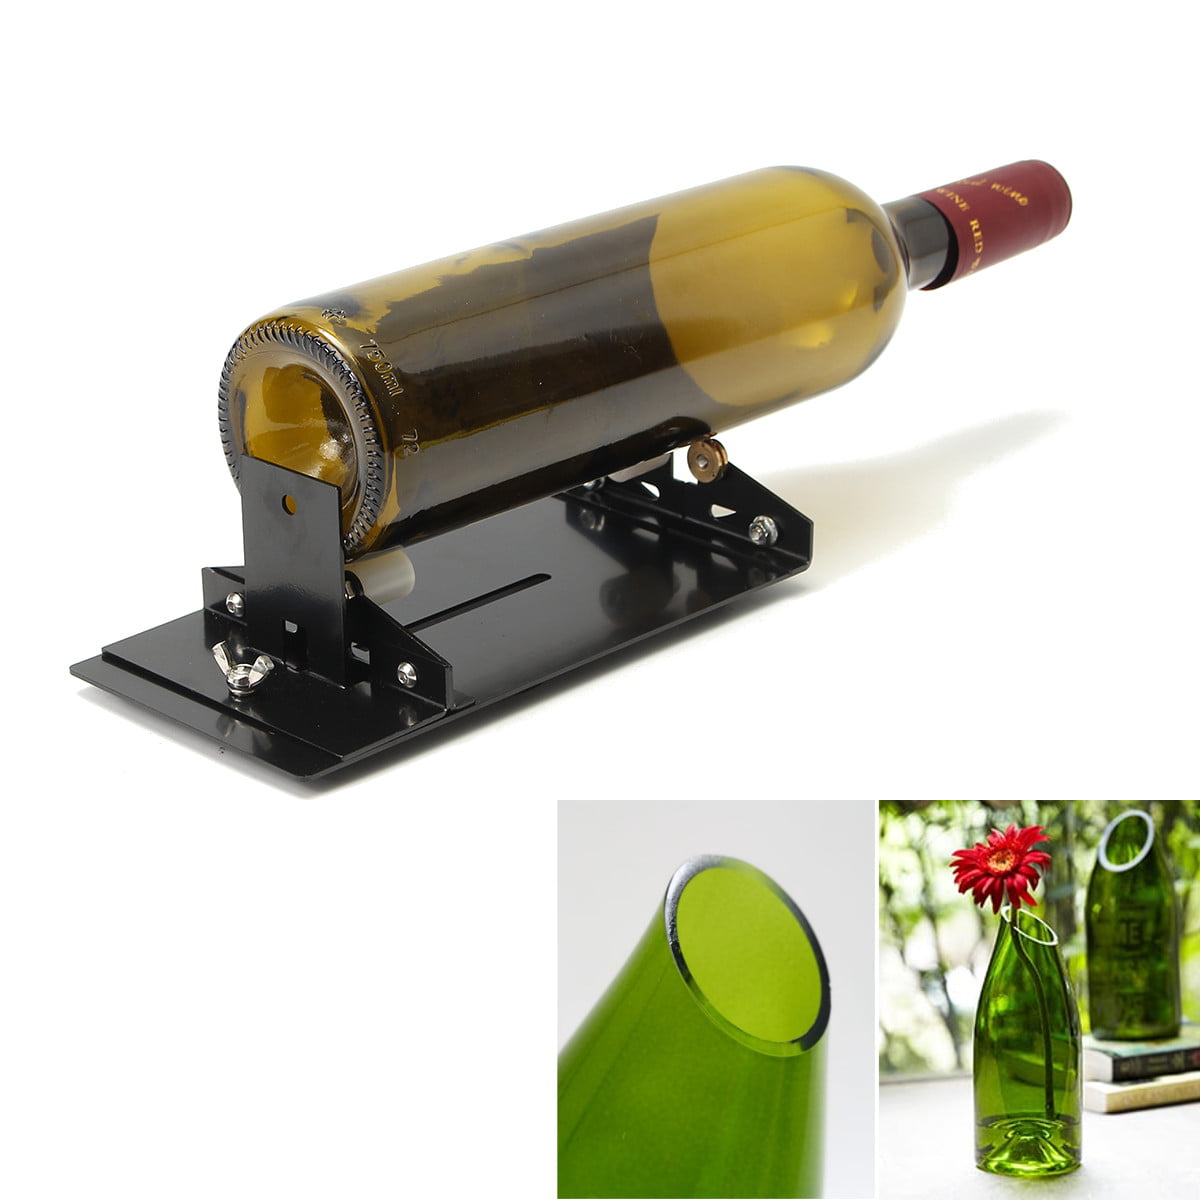 Glass Bottle Cutter Cutting Machine Tool For Jar Wine Beer Recycle DIY Craft CG 